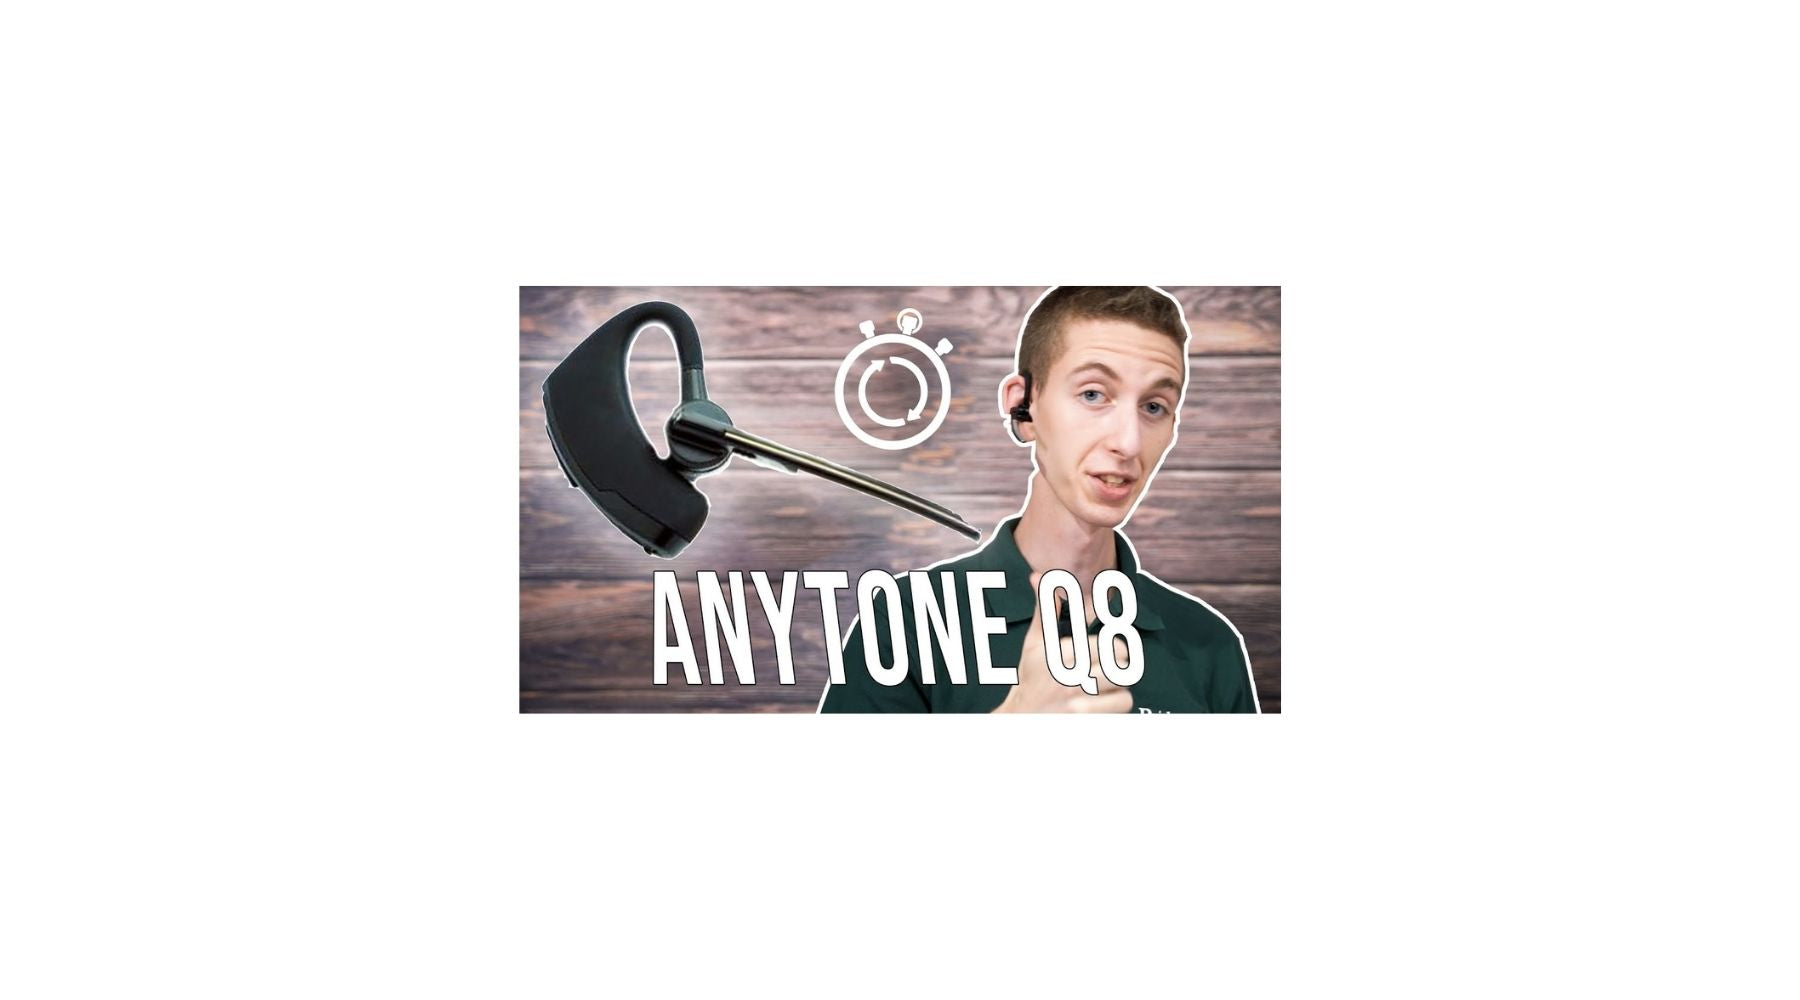 AnyTone Q8 Bluetooth Earpiece Quick Start Guide